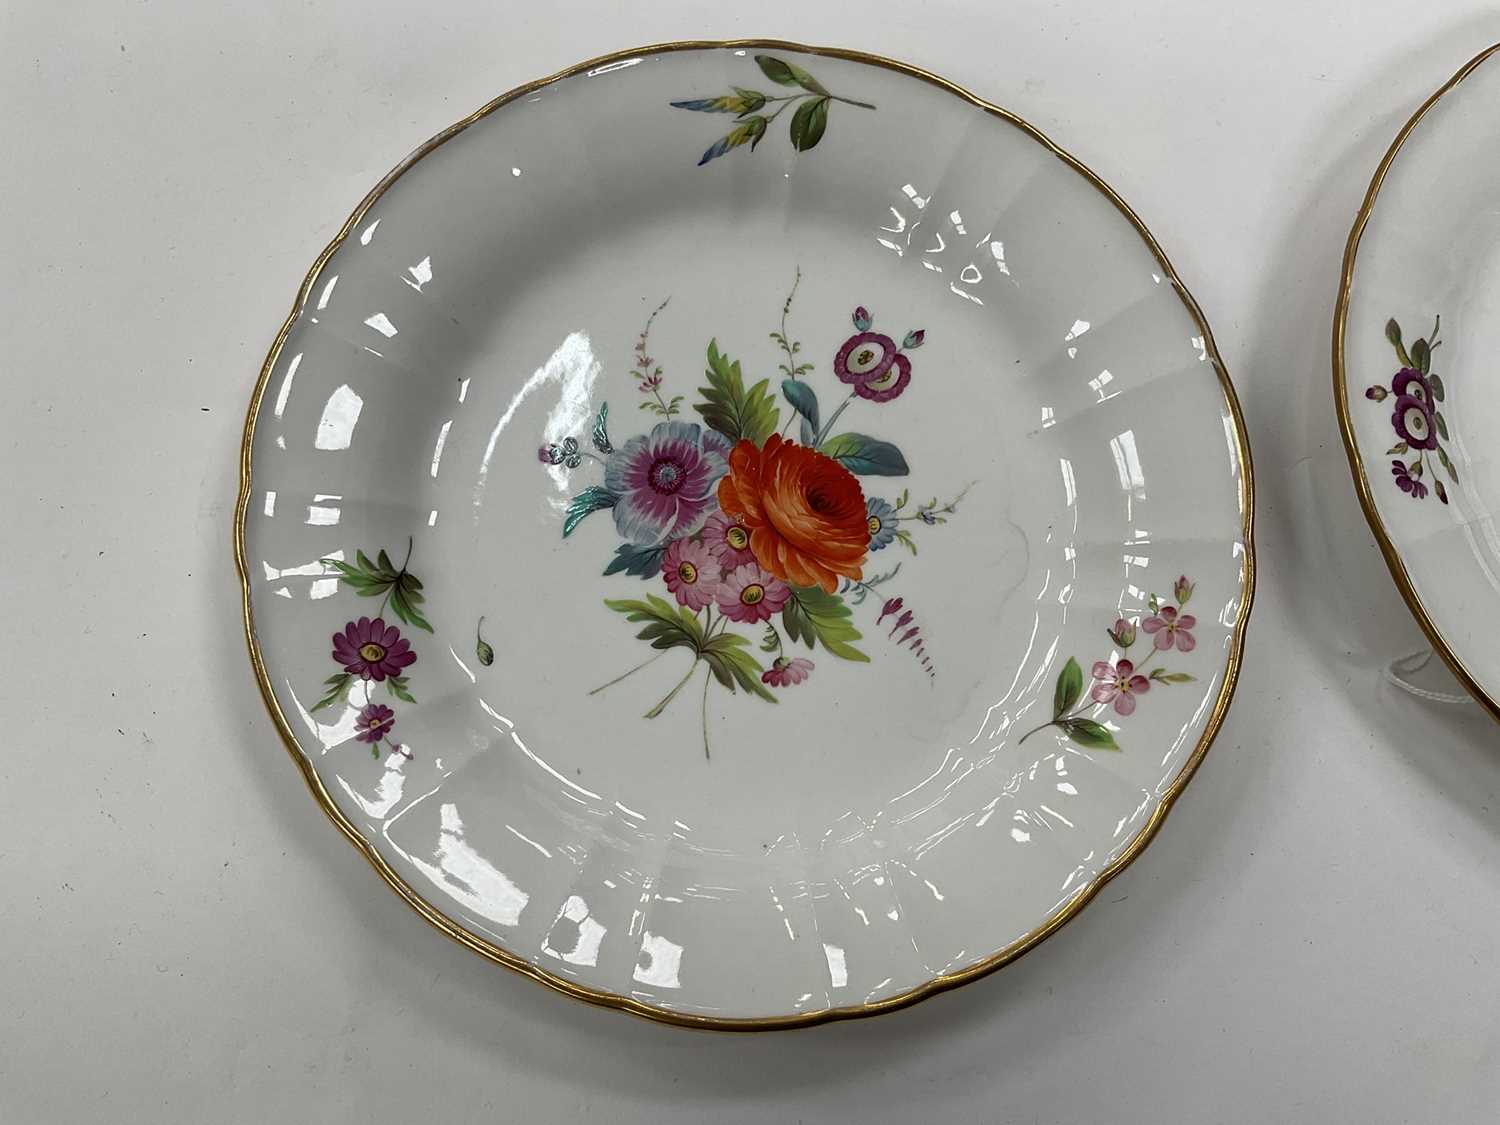 Pair of Wedgwood bone china plates, painted with flowers - Image 5 of 7